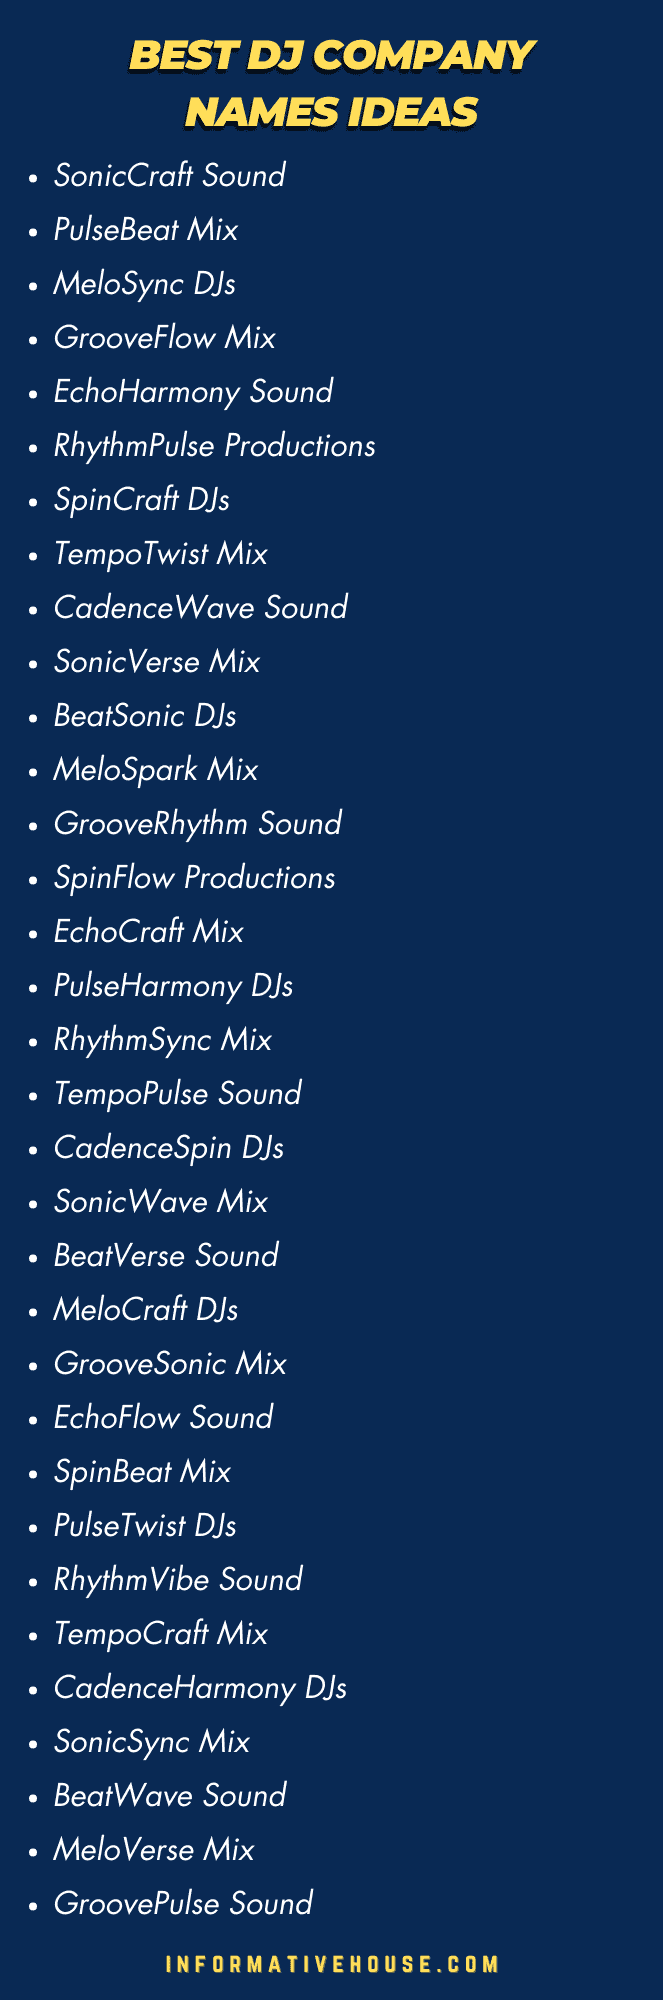 Top 50 Best Dj Company Names Ideas for startup